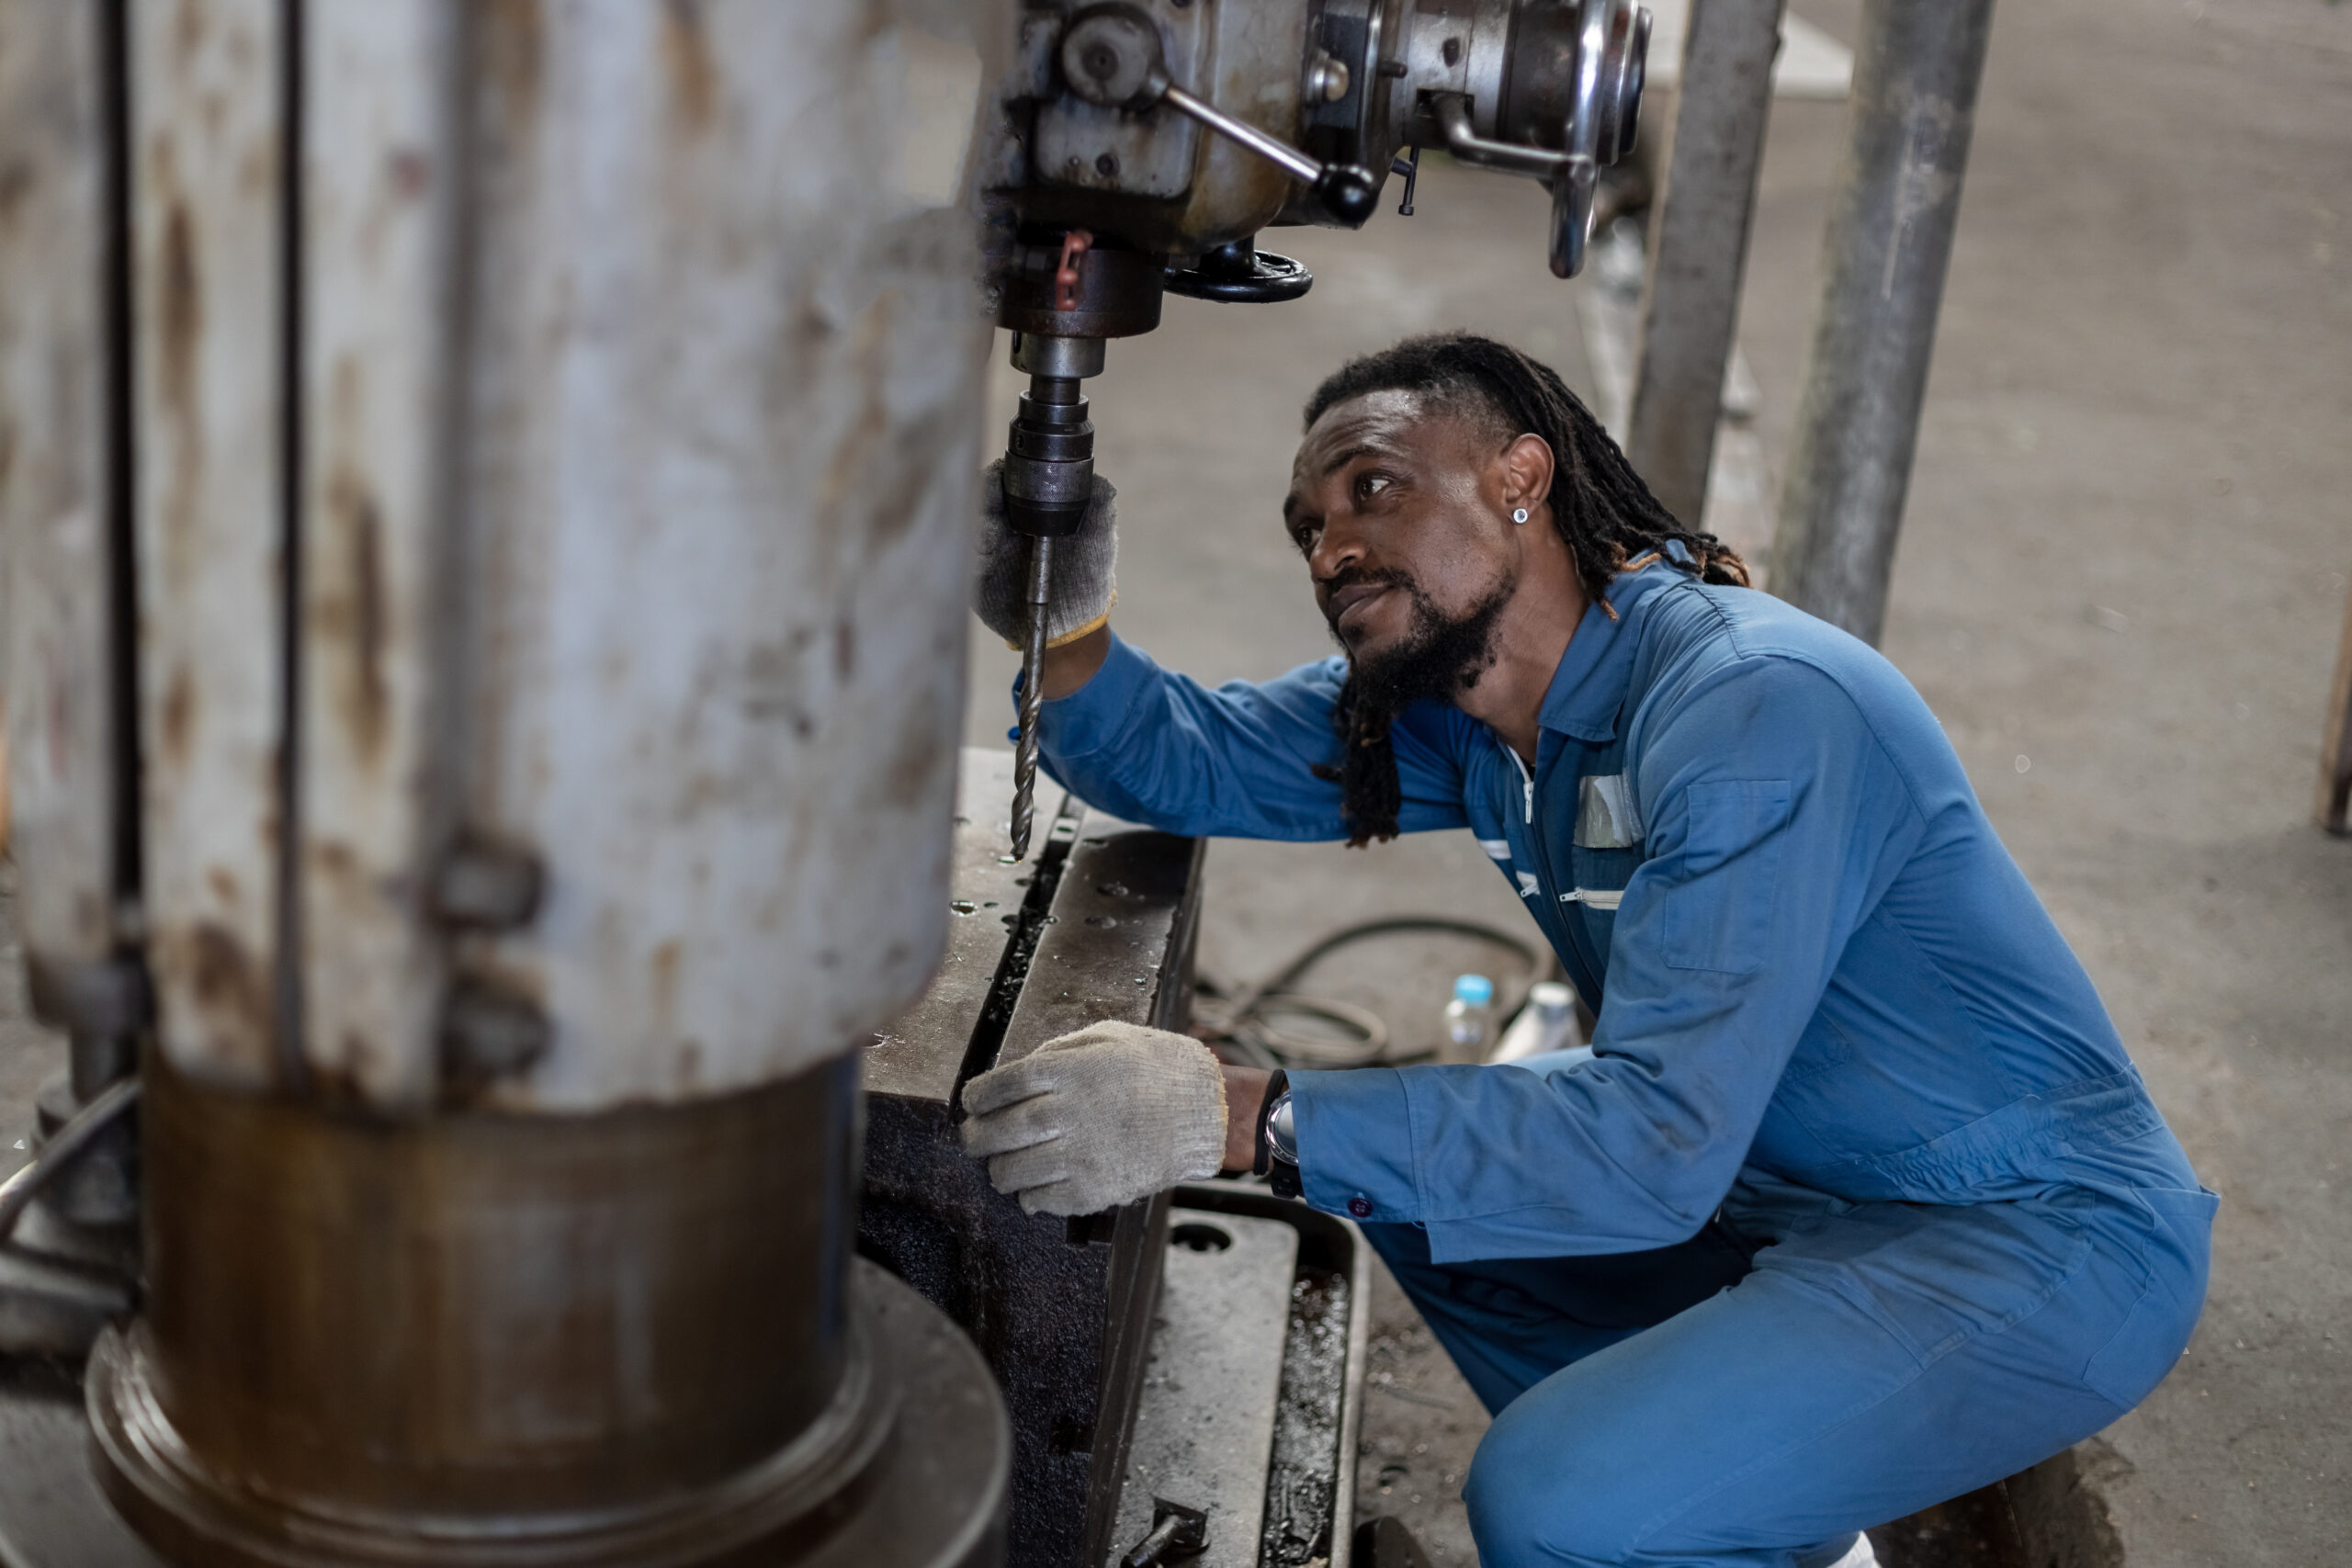 A Black male mechanic, wearing a blue jumpsuit and holding a wrench, inspects a car engine.